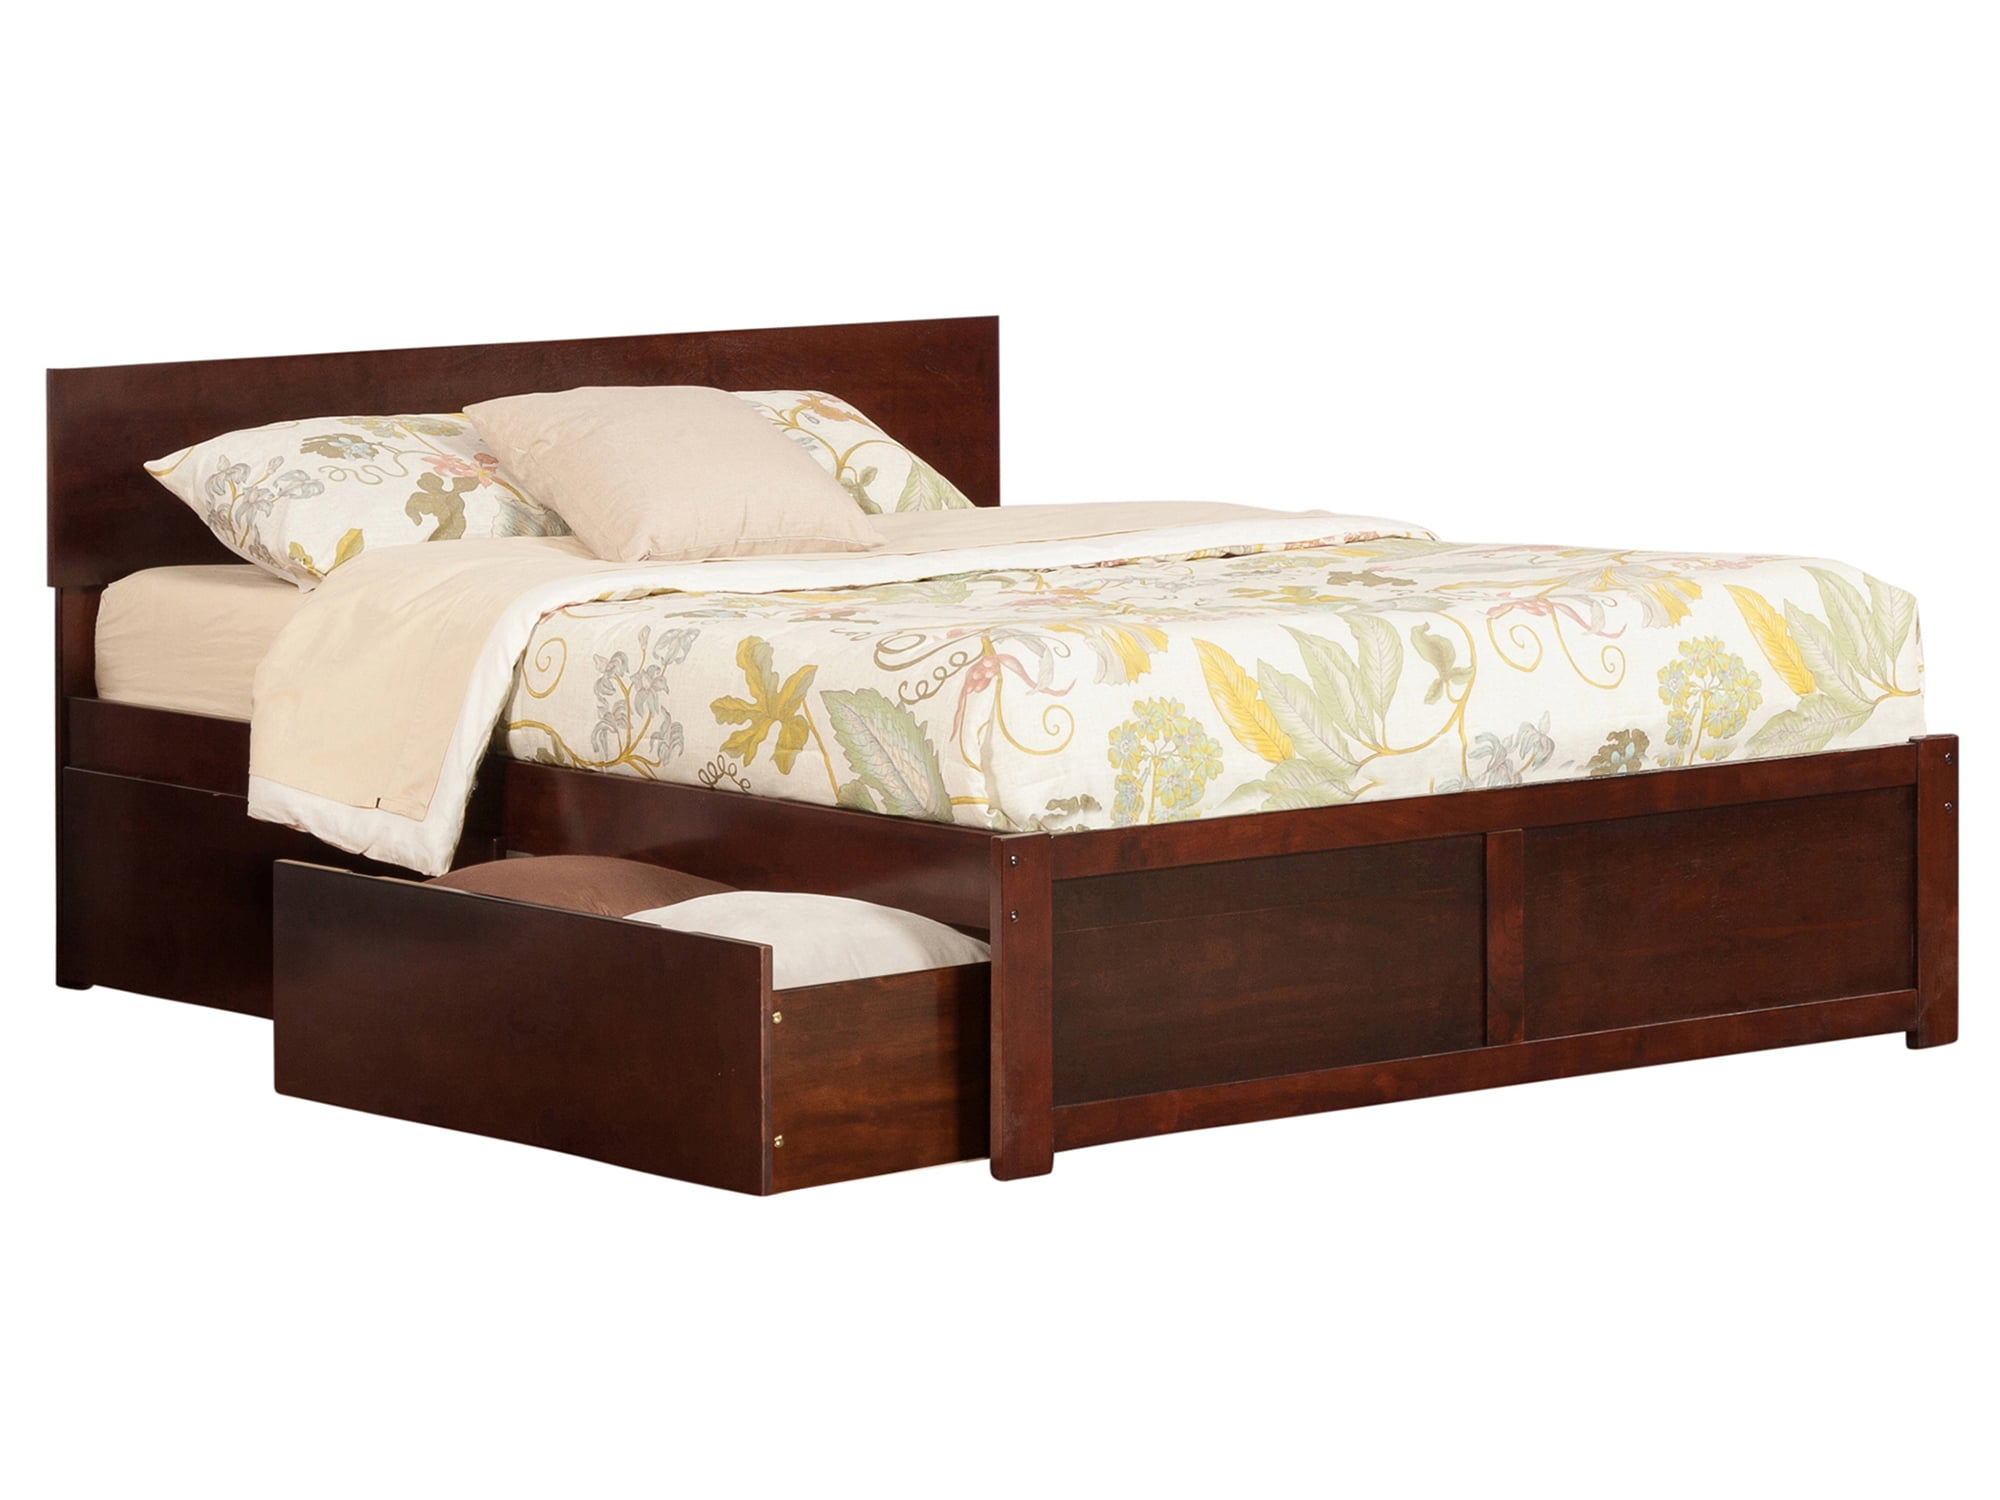 Ar8152114 Orlando Flat Panel Foot Board With Urban Bed Drawers, Antique Walnut - King